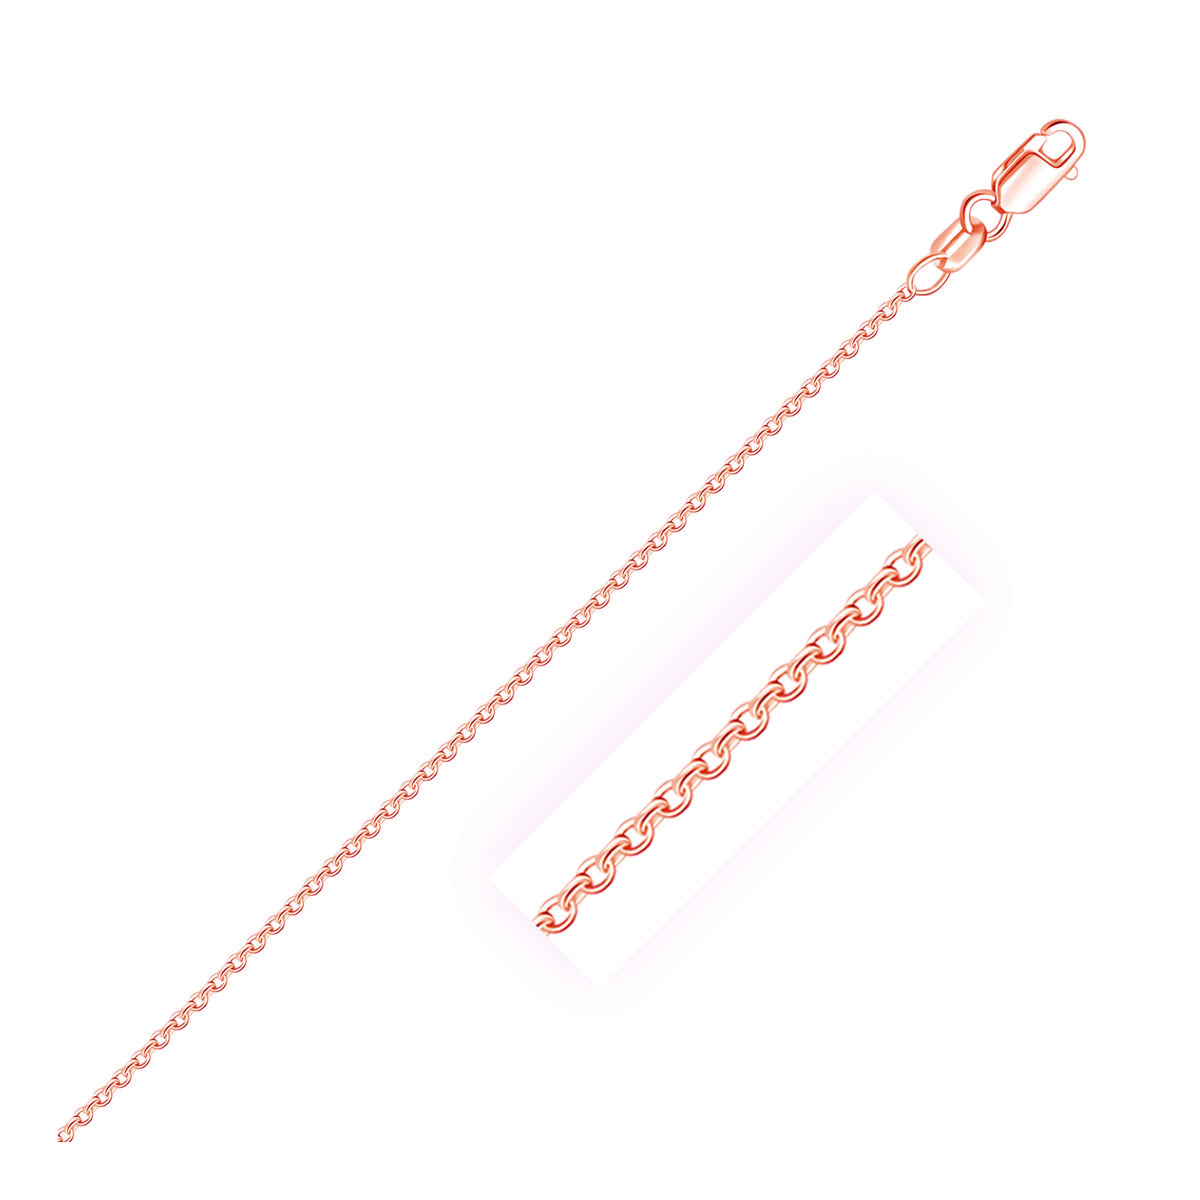 Round Cable Link Chain - 14k Rose Gold 1.50mm